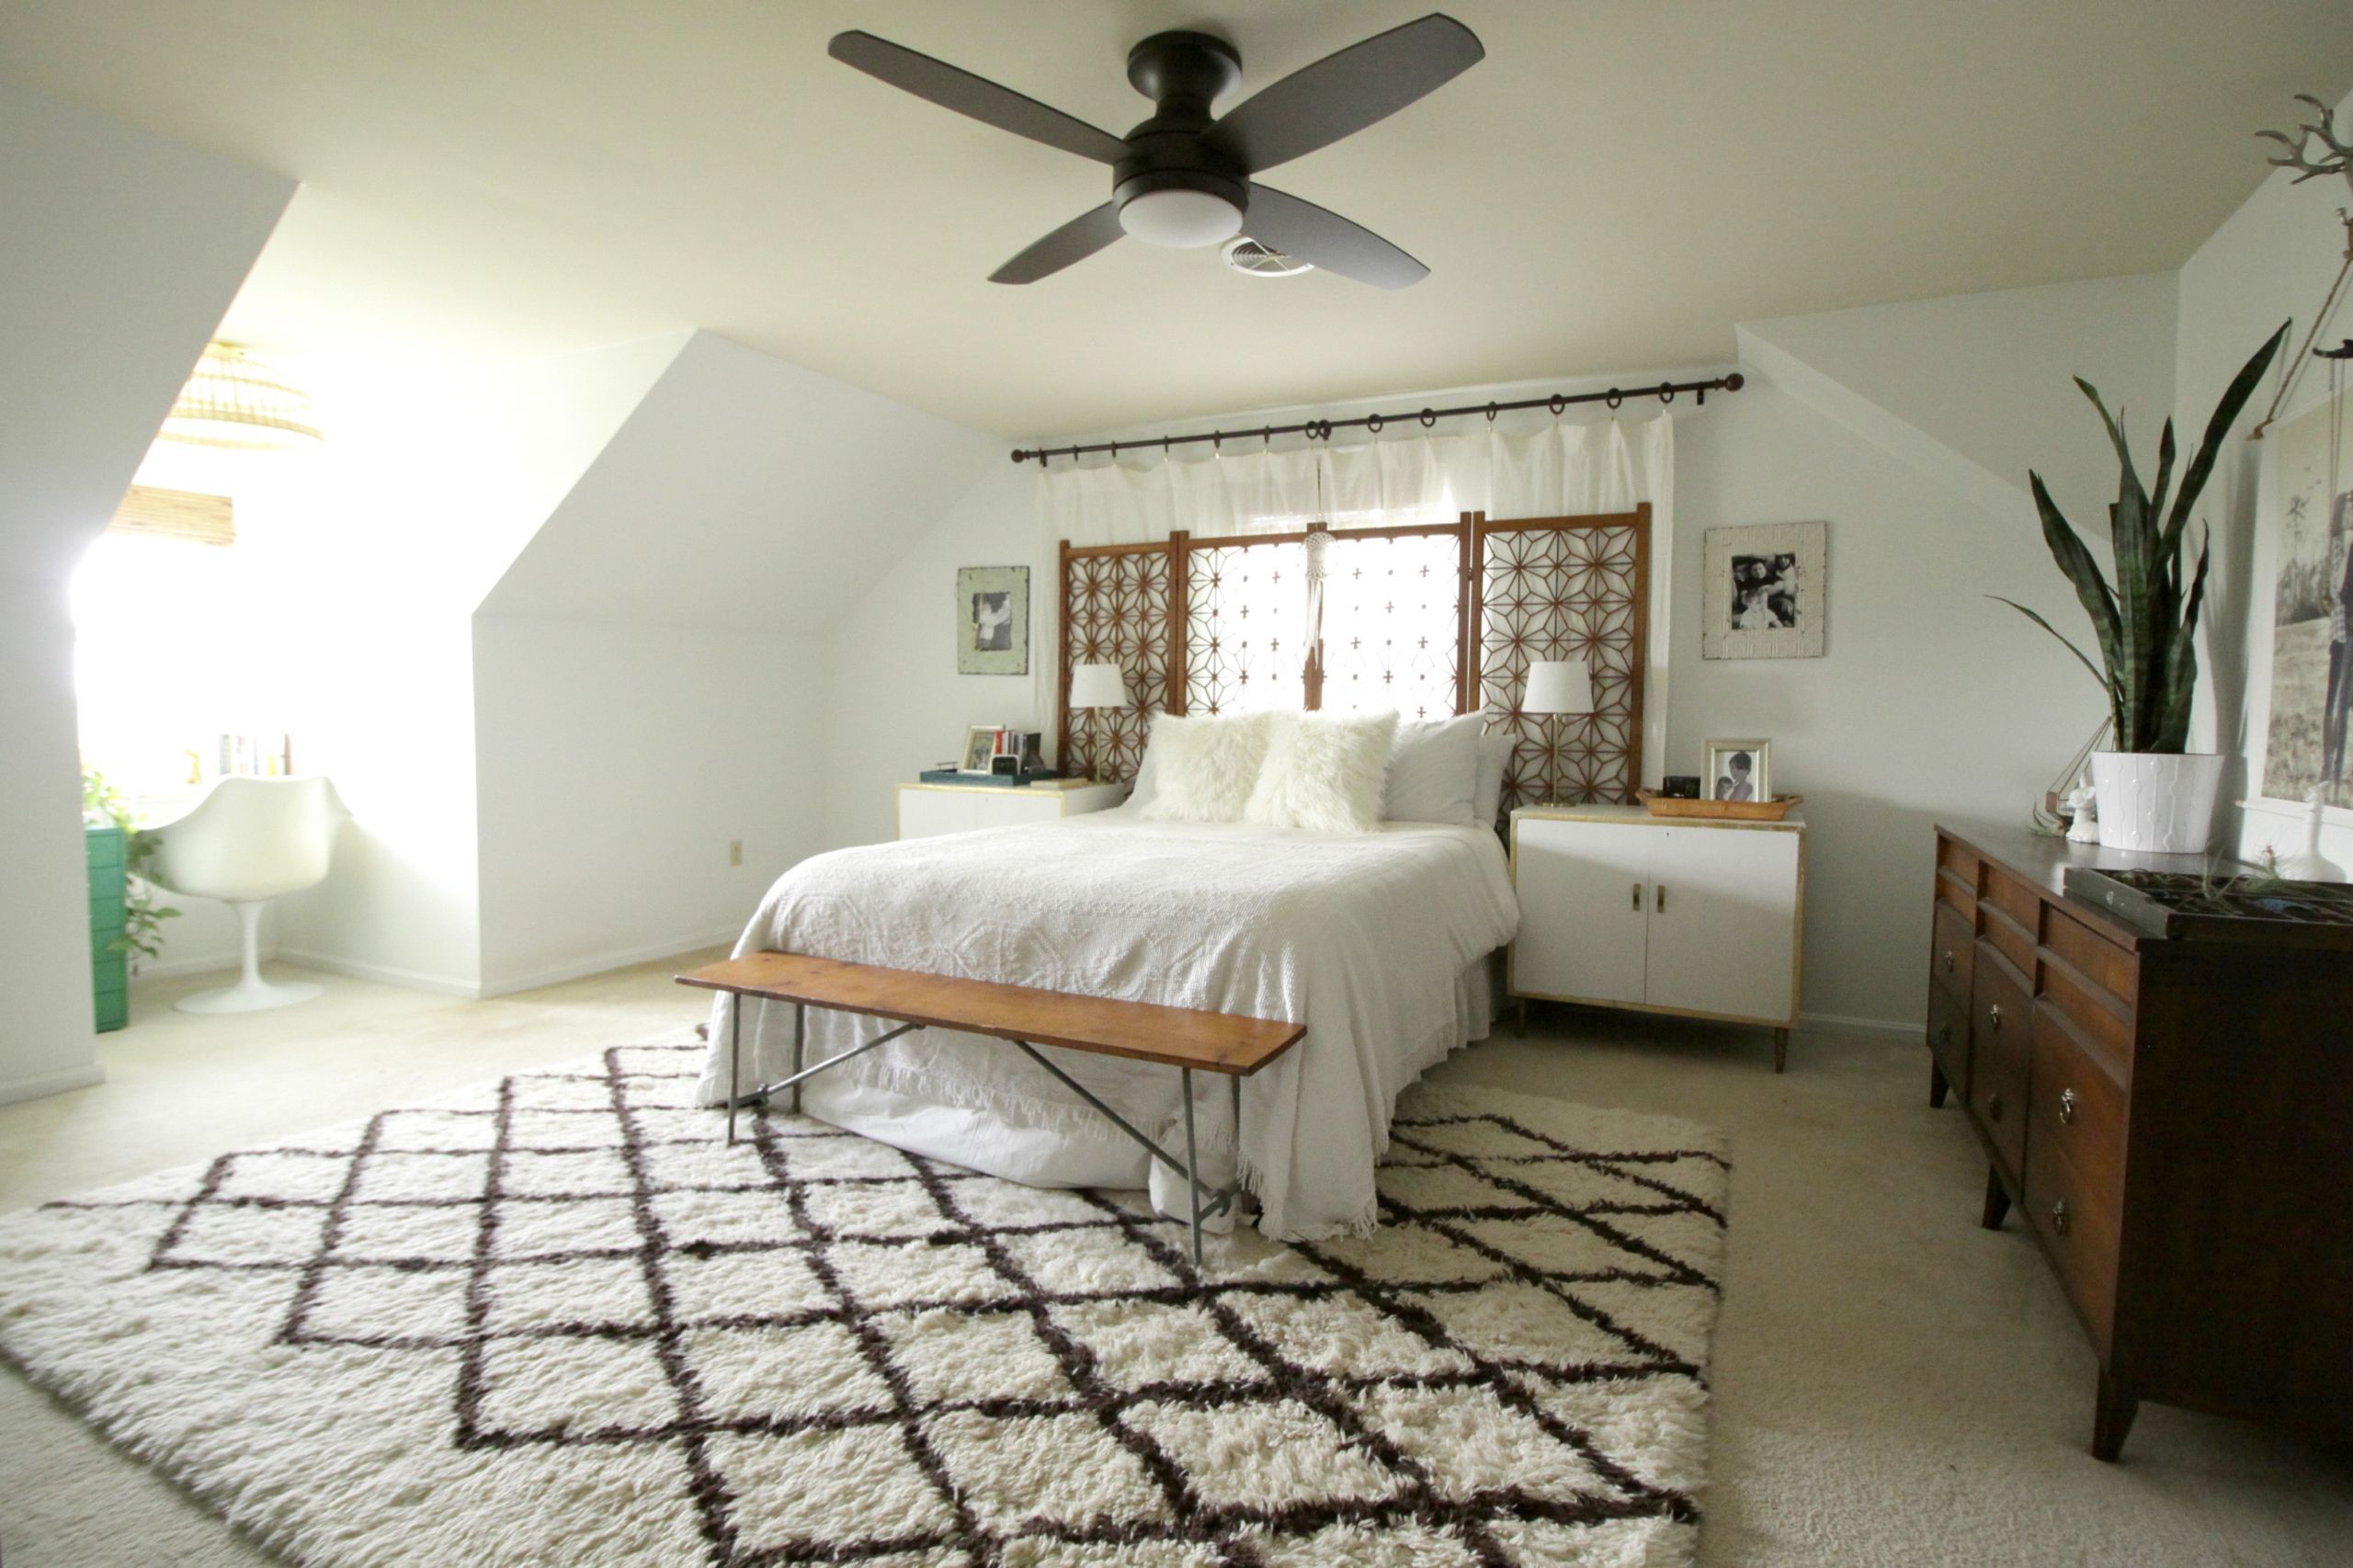 Bedroom Ceiling Fan With Light
 New Ceiling Fan in the Master Bedroom Cassie Bustamante